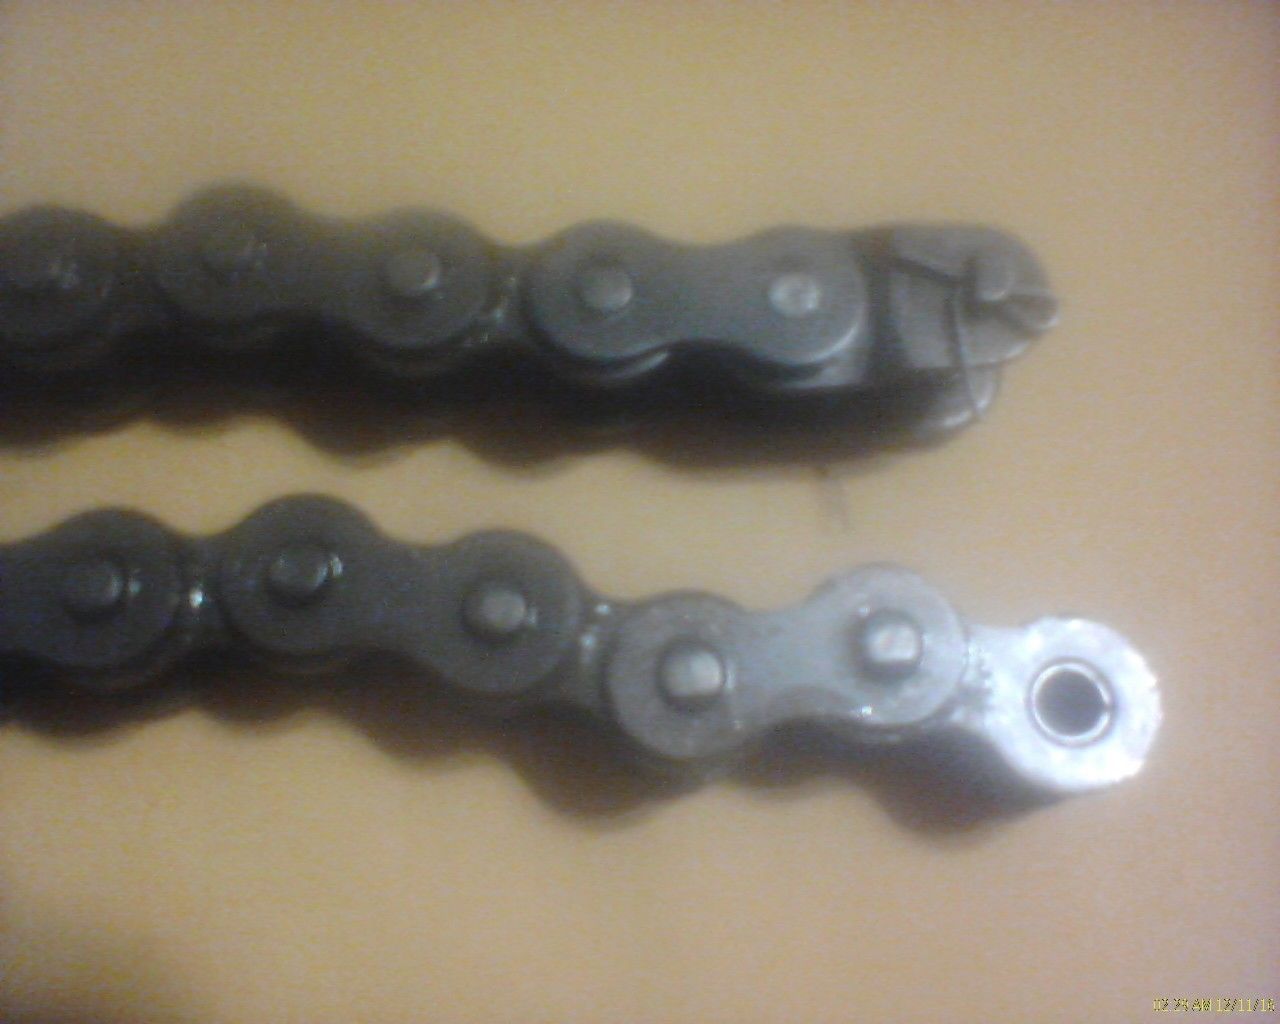 NEW - Murray NOMA Snow Blower Thrower Drive Chain Replaces 583013MA S4041HL - $19.95